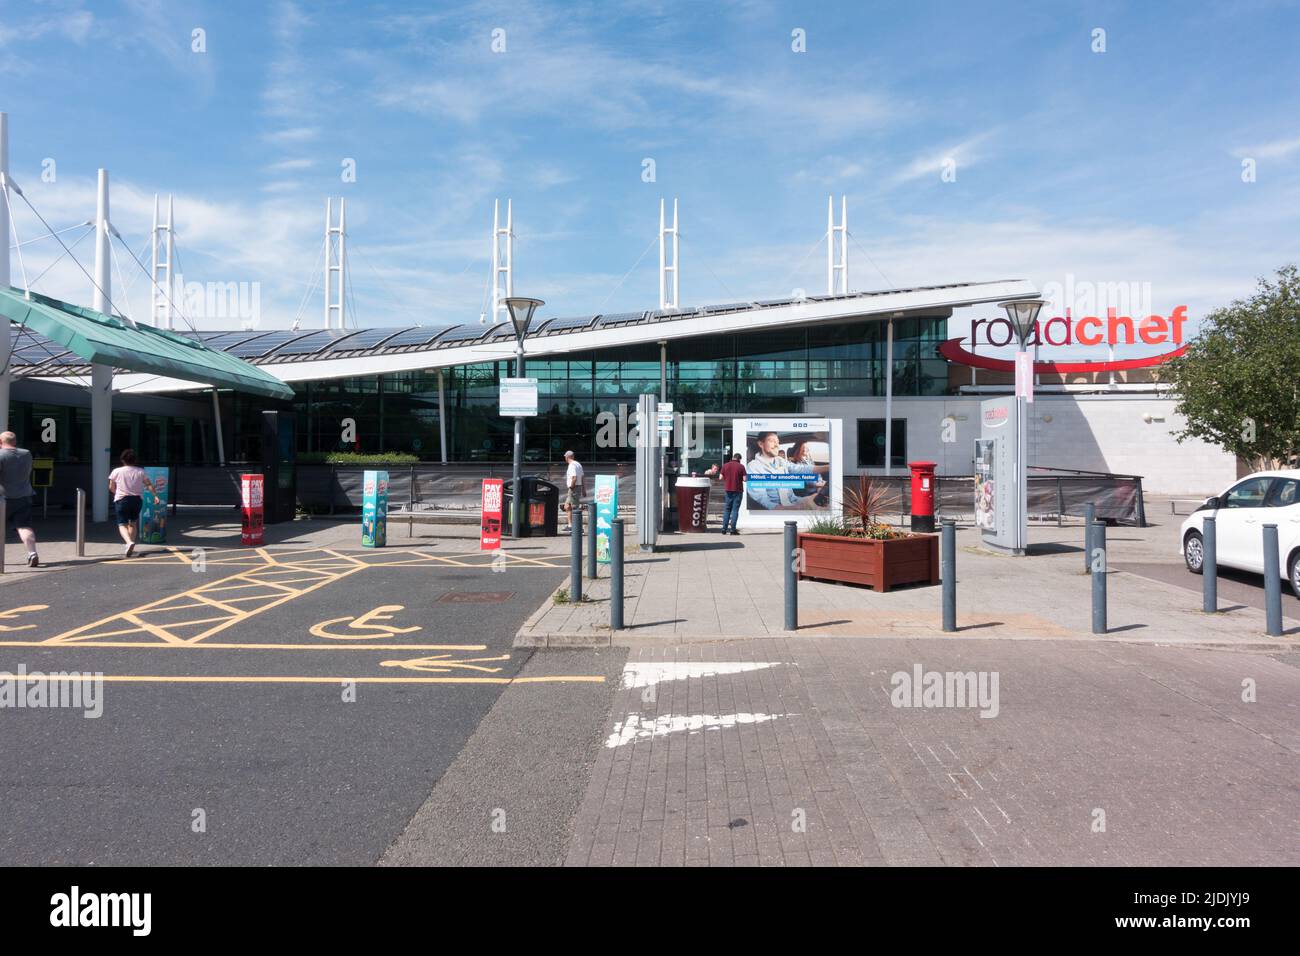 Roadchef third largest Motorway services provider in England Stock Photo